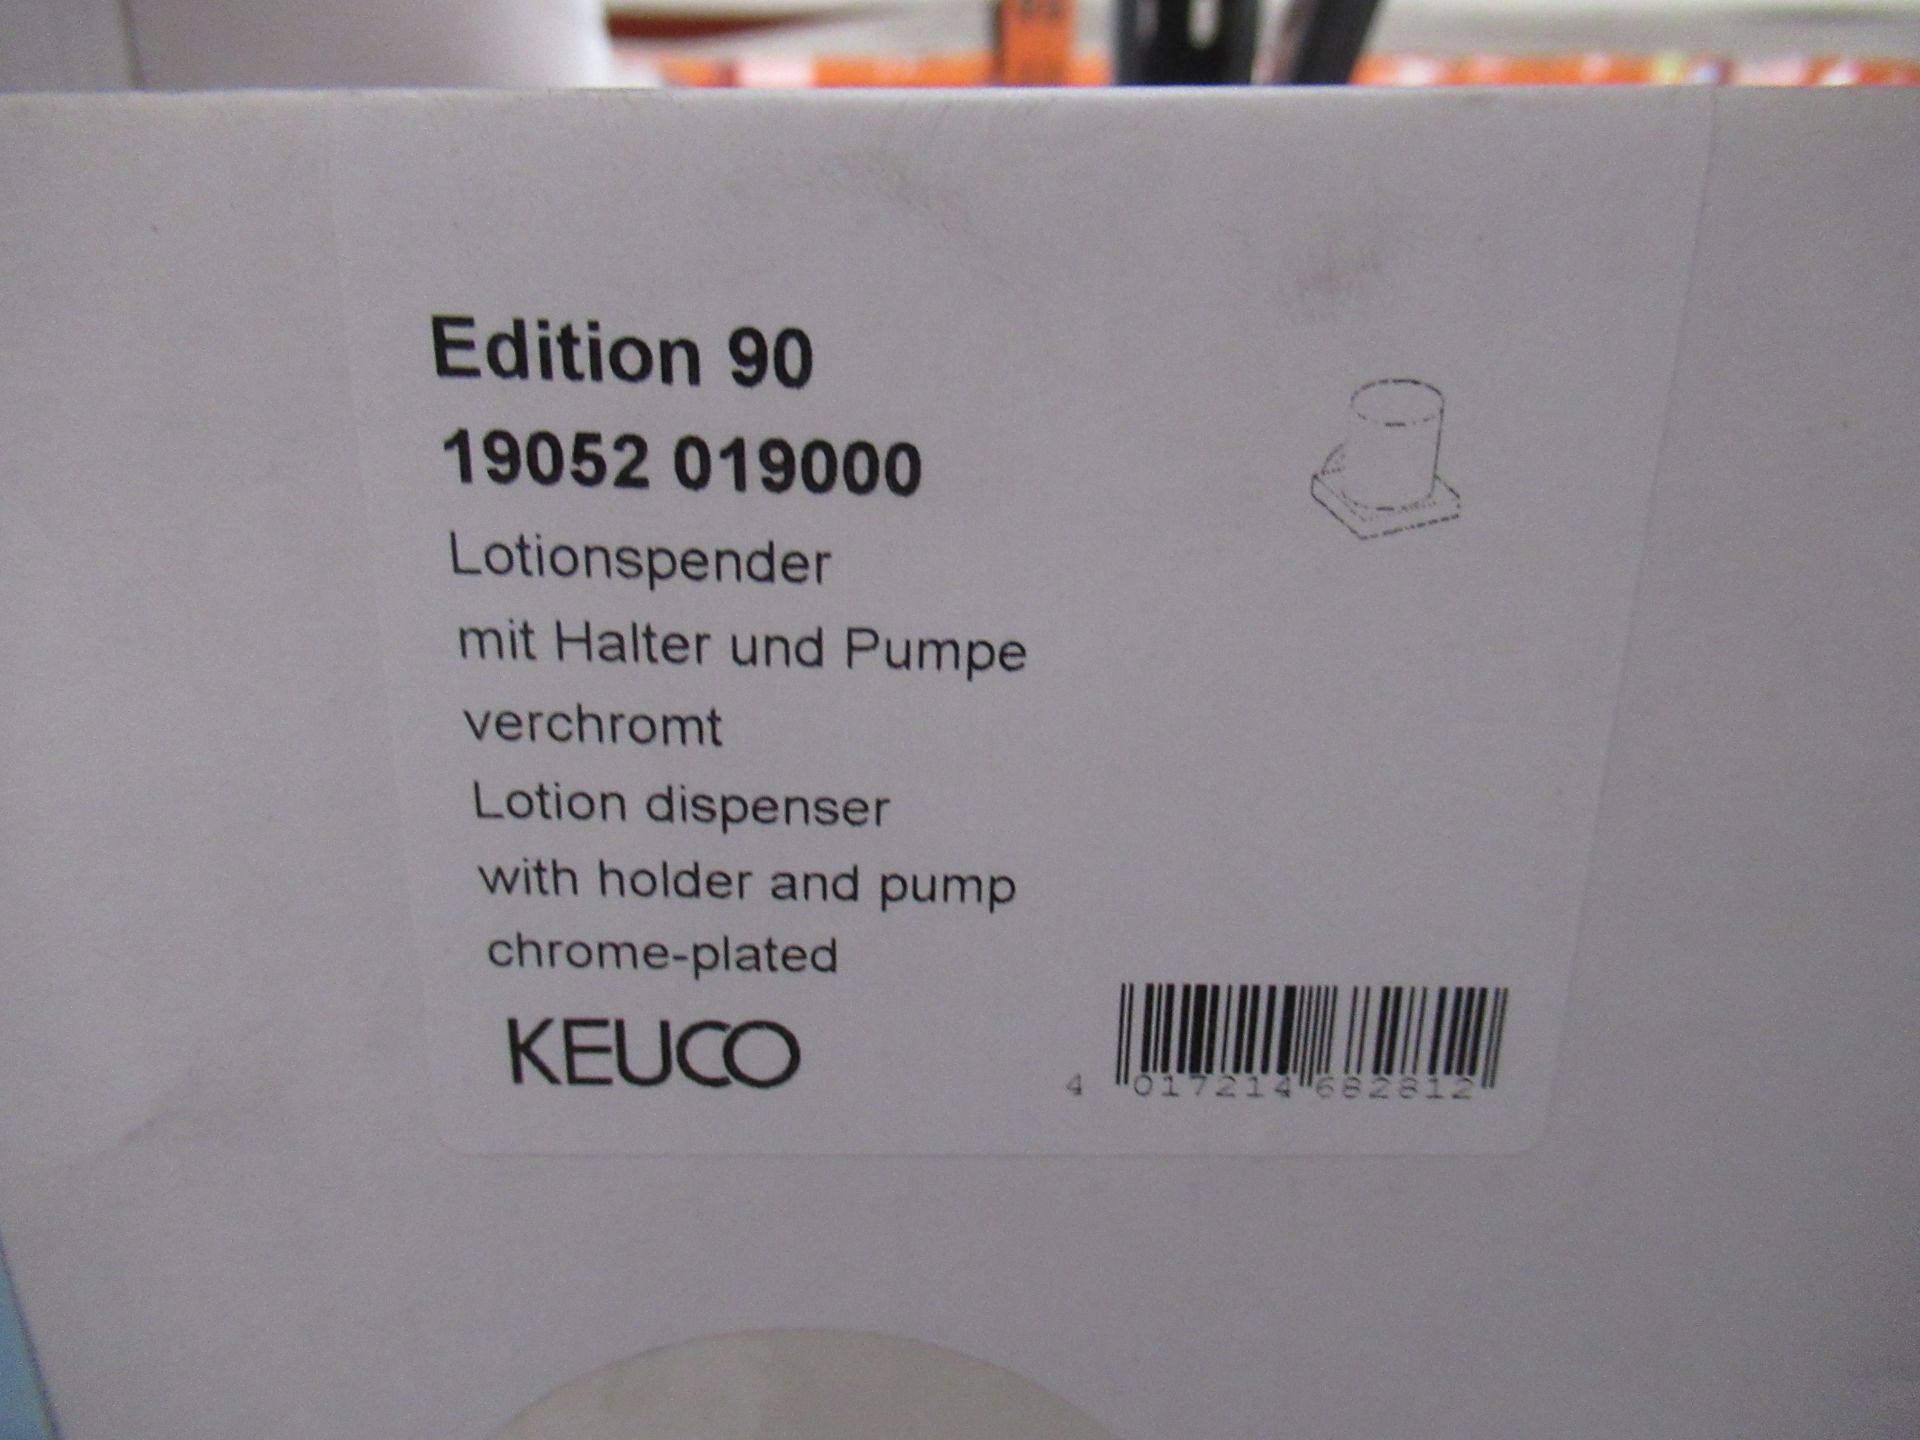 2 x Keuco Edition 90 Lotion Dispensers Chrome Plated, P/N 19052-019000 - Image 2 of 2